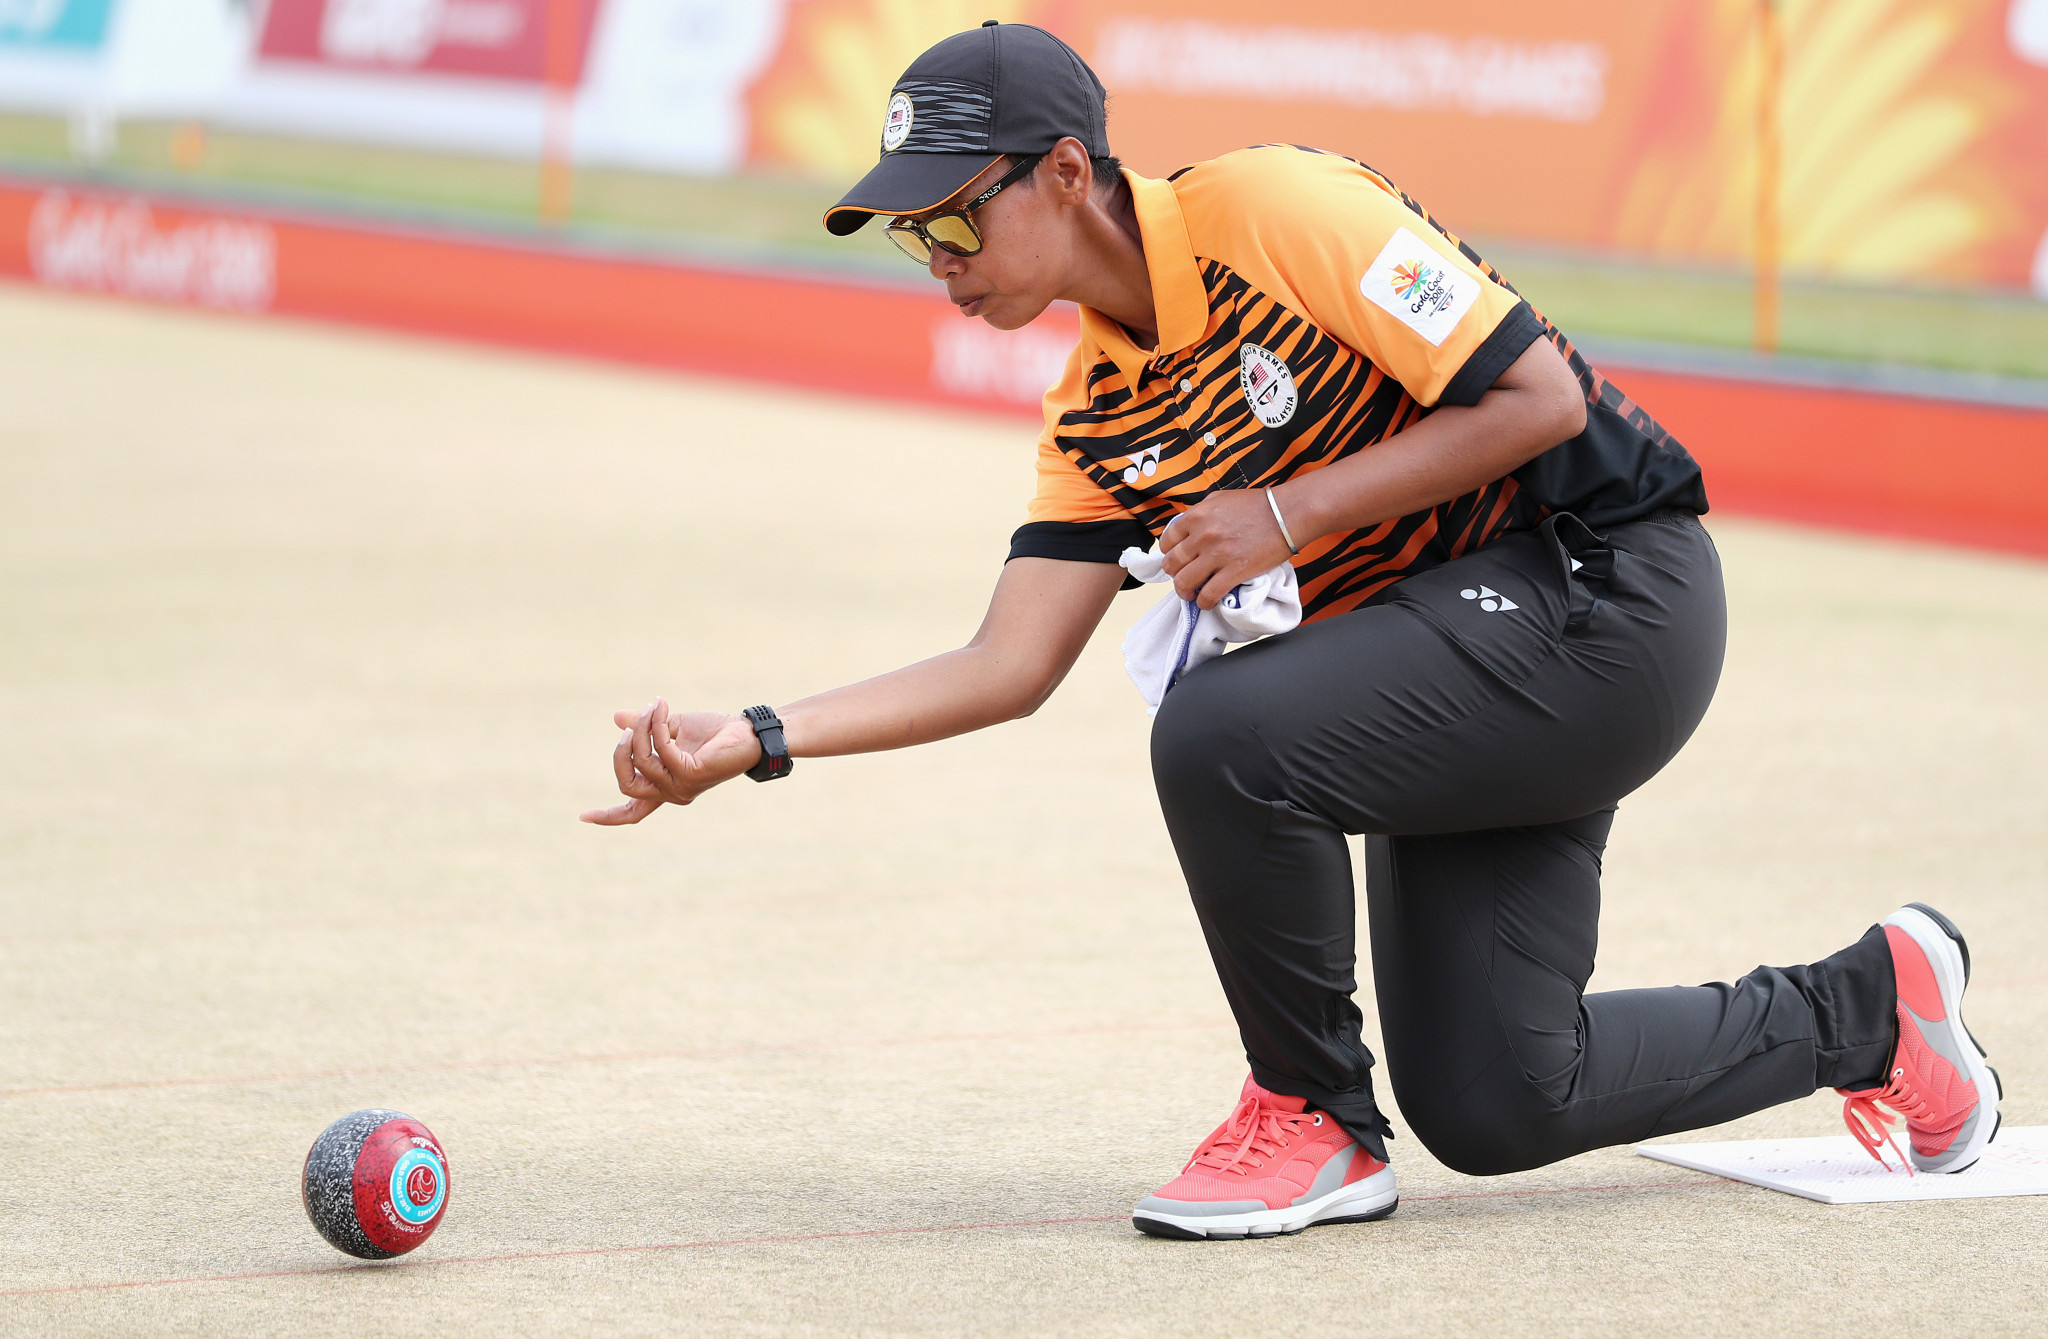 Ahmad and Tham top women's singles sections after opening day of Asia Pacific Bowls Championships